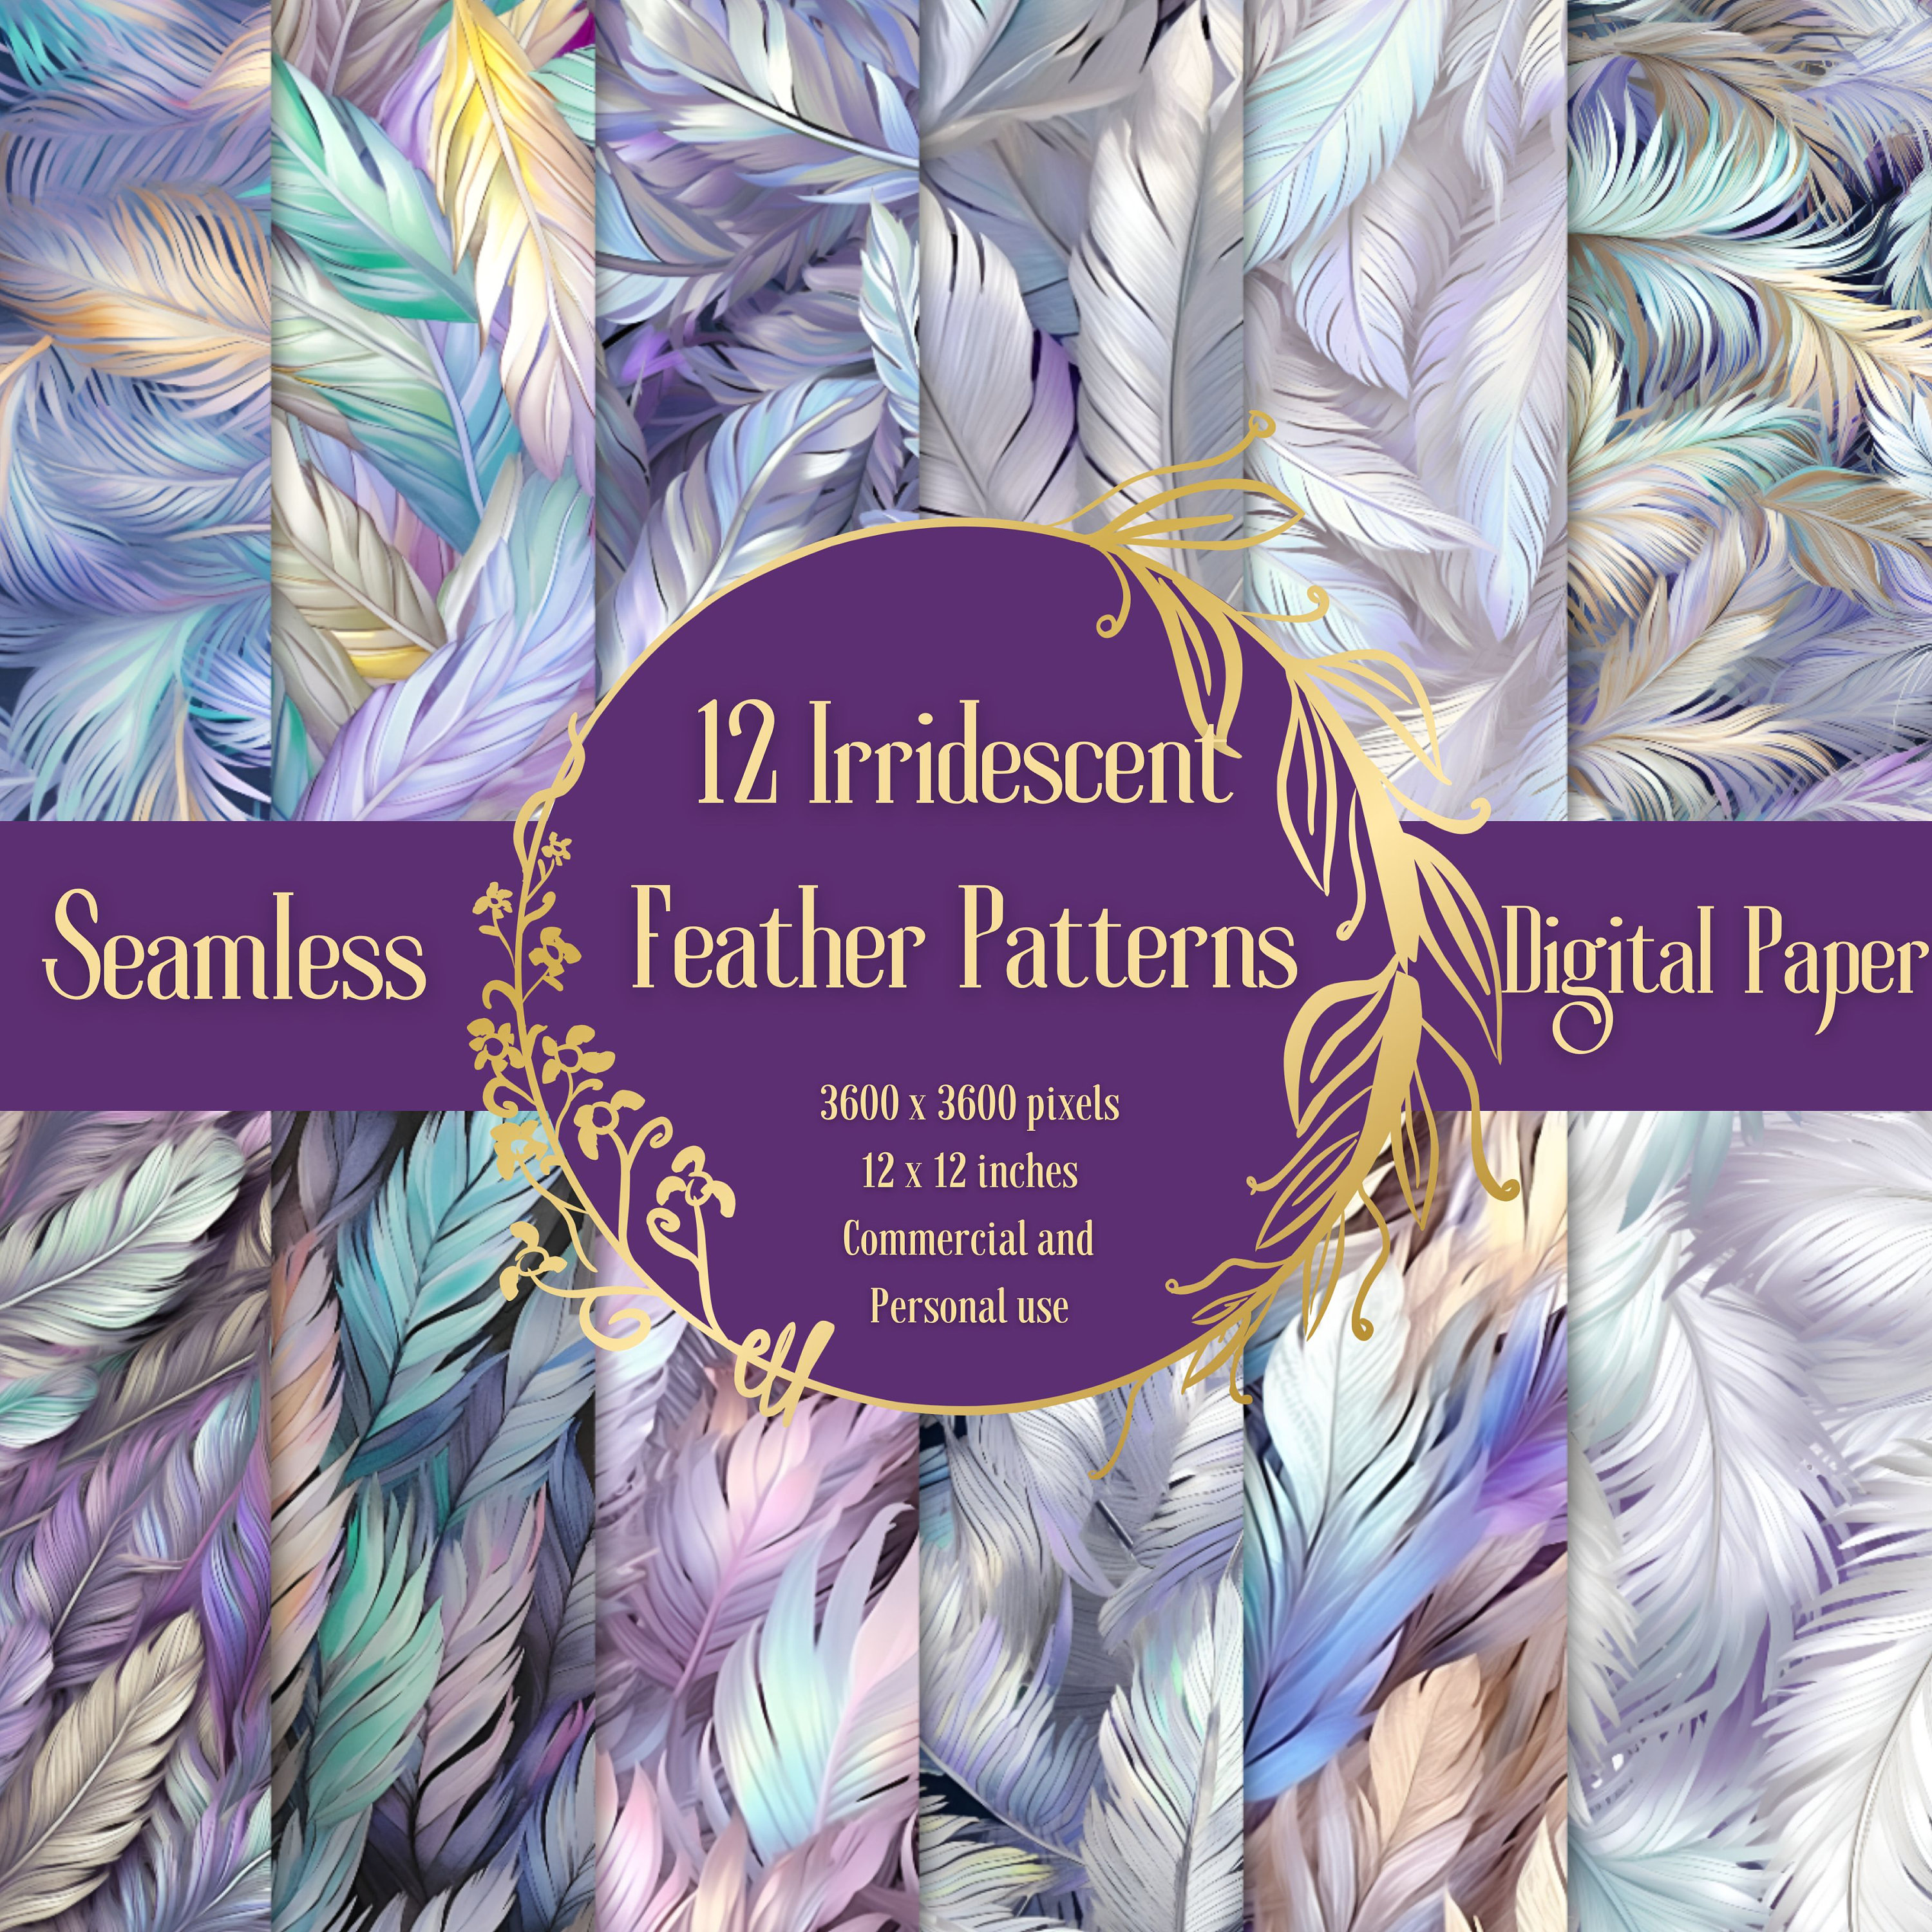 Threaders 12 x 12 Quilting Stencils - Feathers